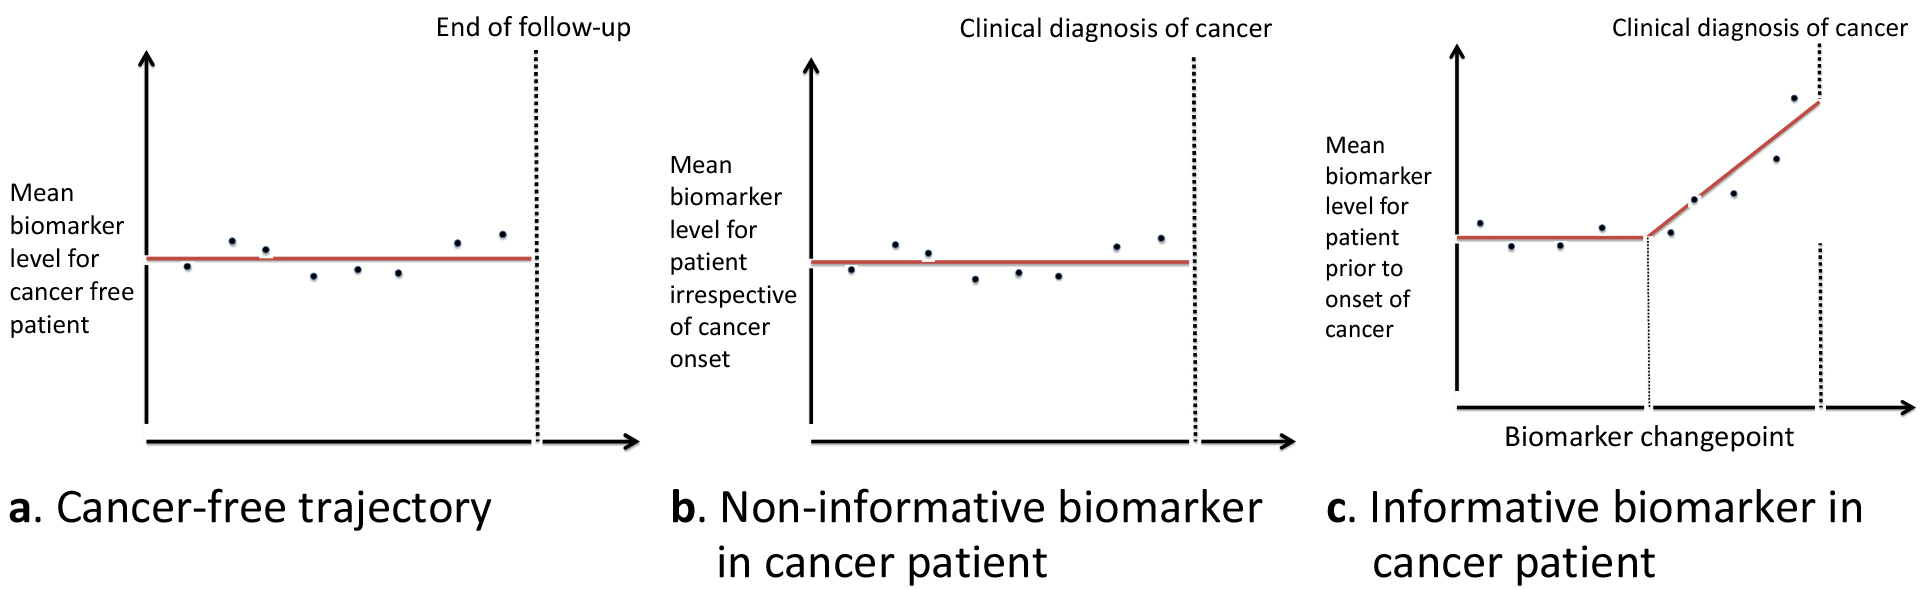 Biomarker model structure assumed in the generalized fully Bayesian algorithm for screening with multiple biomarkers.